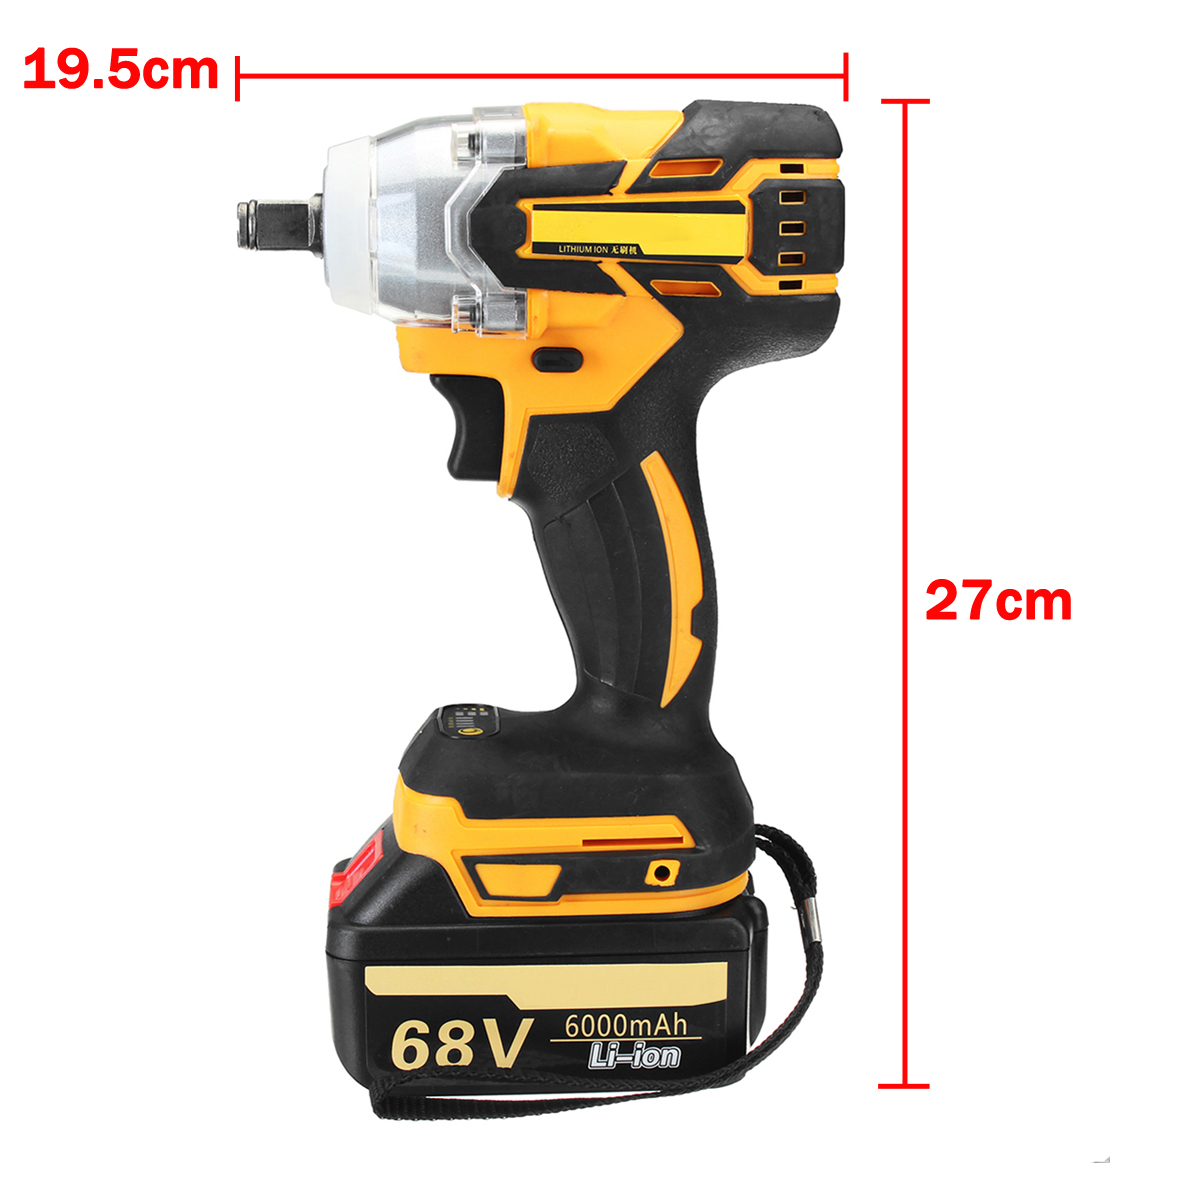 68V-6000mAh-Electric-Wrench-2-Batteries-1-Charger-Brushless-Cordless-Drive-Impact-Wrench-Tools-1282965-10